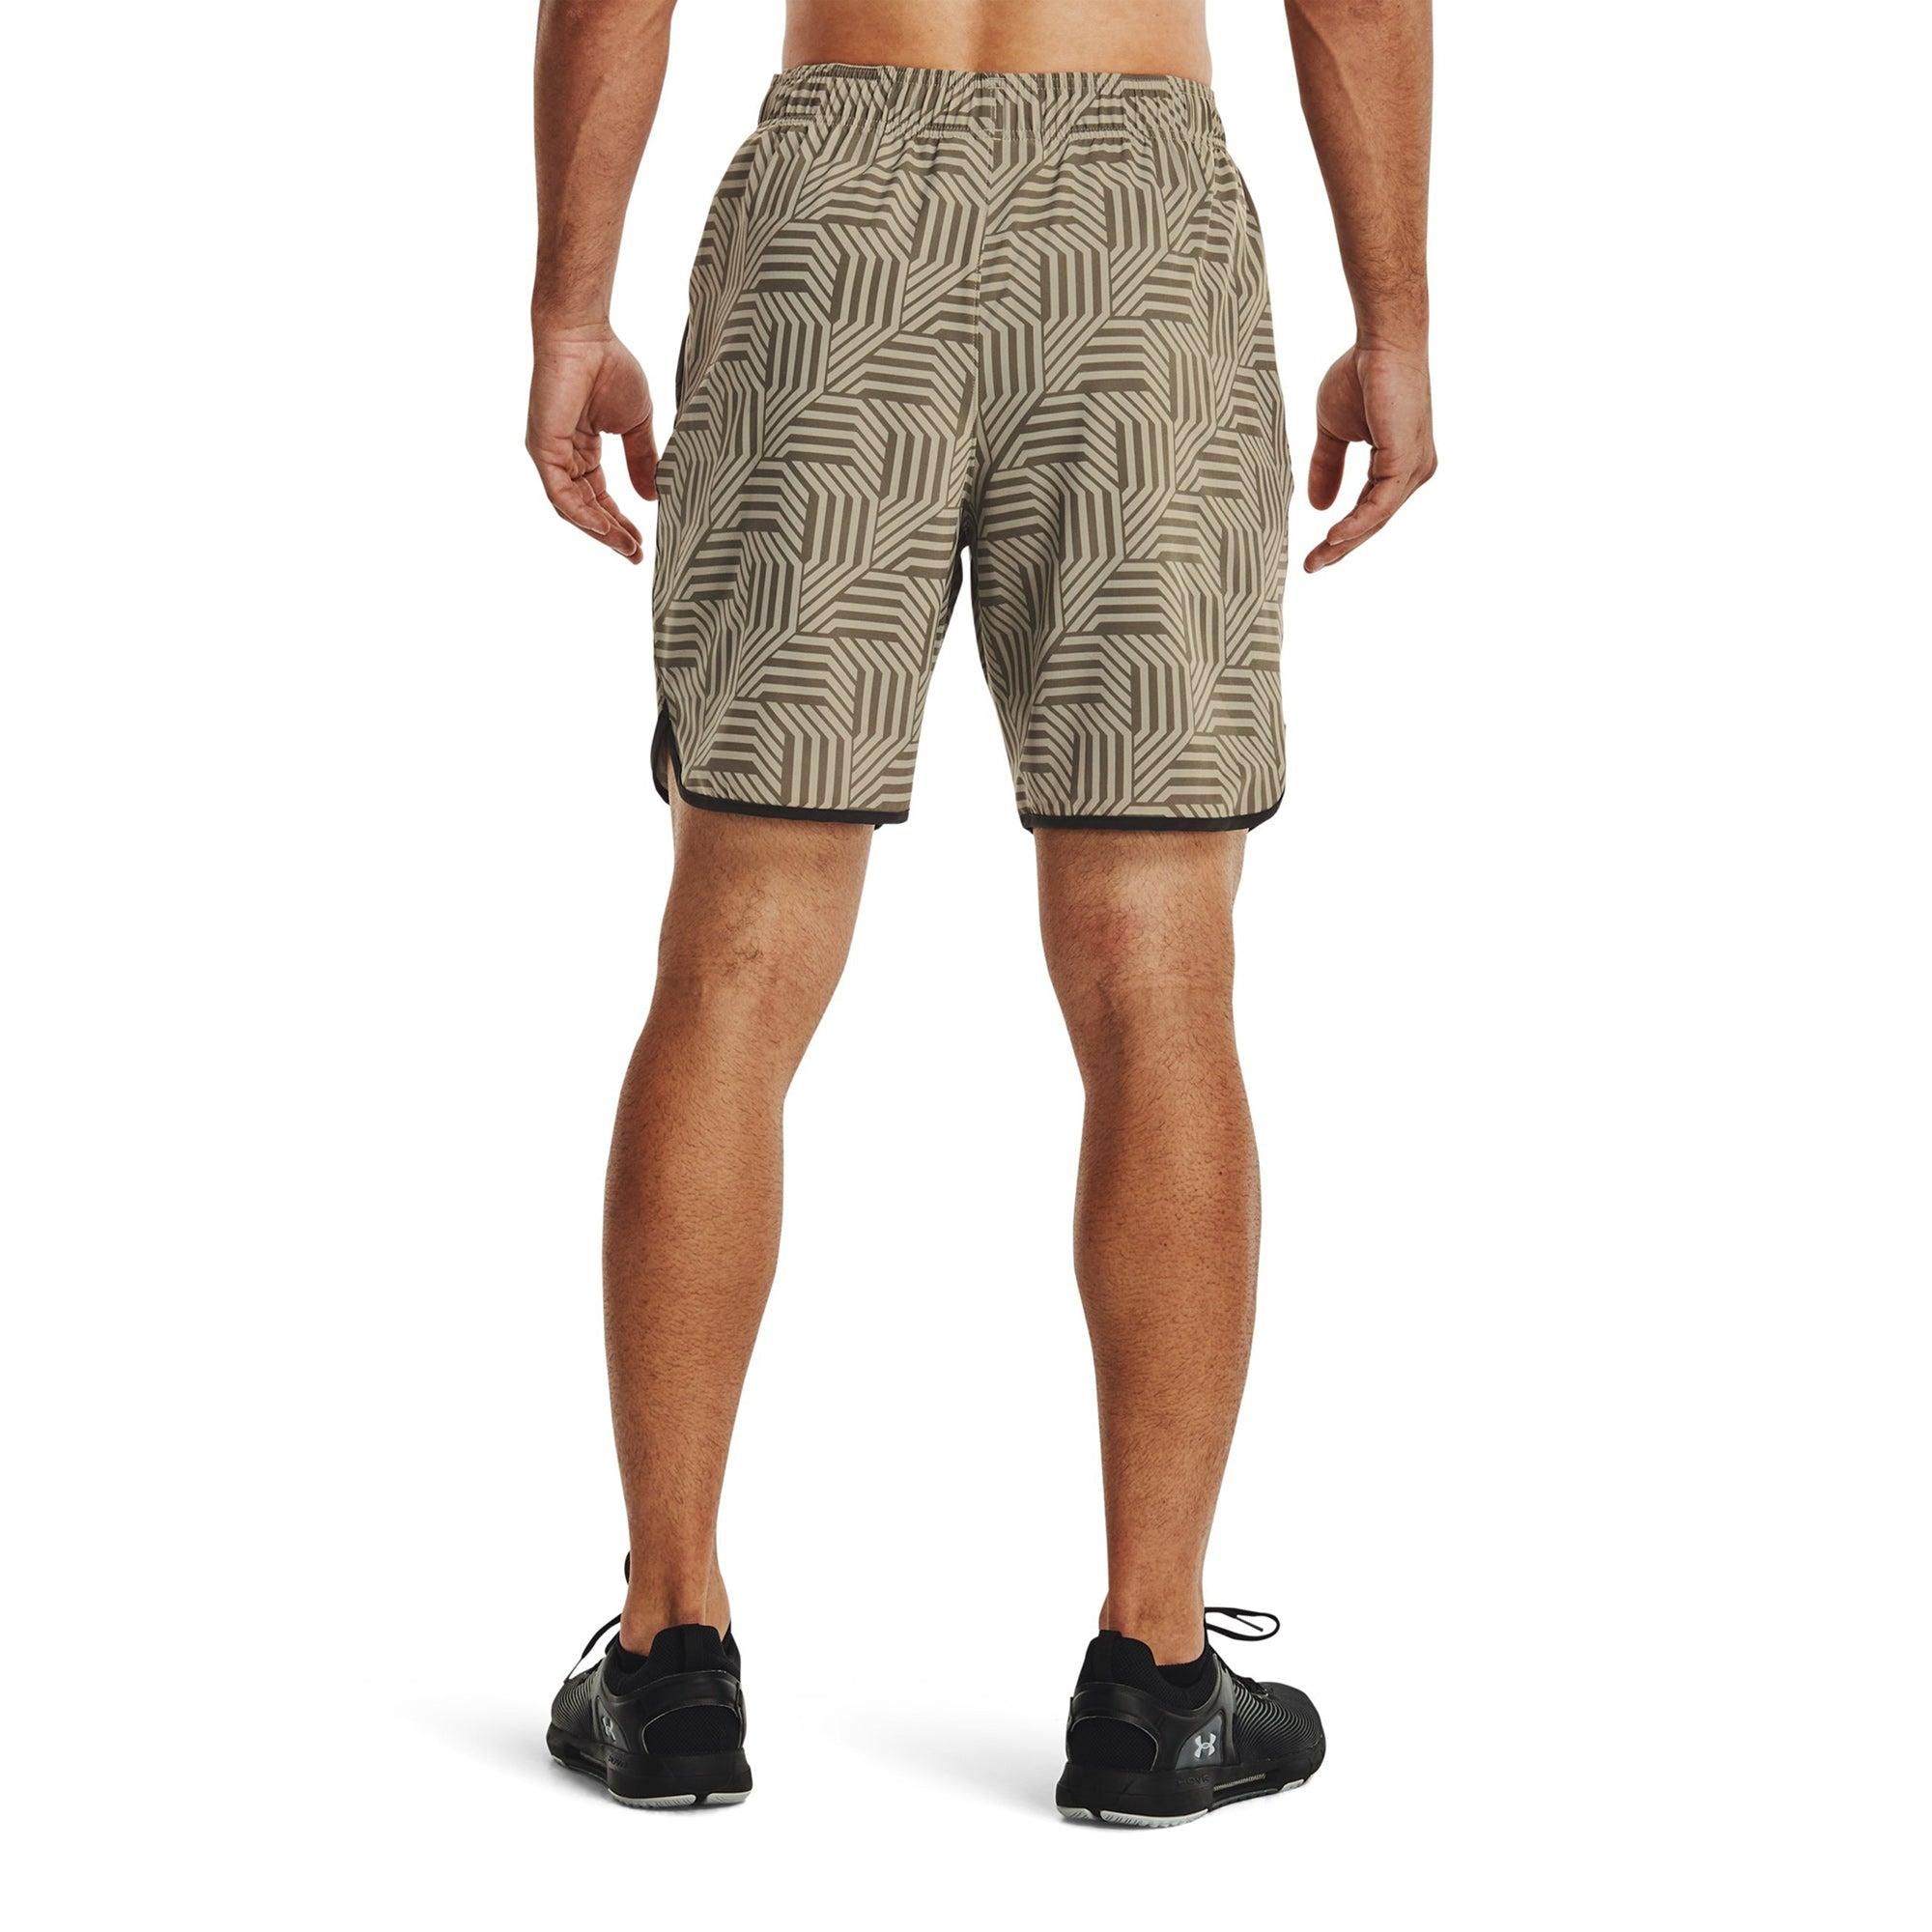 Quần ngắn thể thao nam Under Armour Hiit Woven Geotessa Sts - 1370386-361